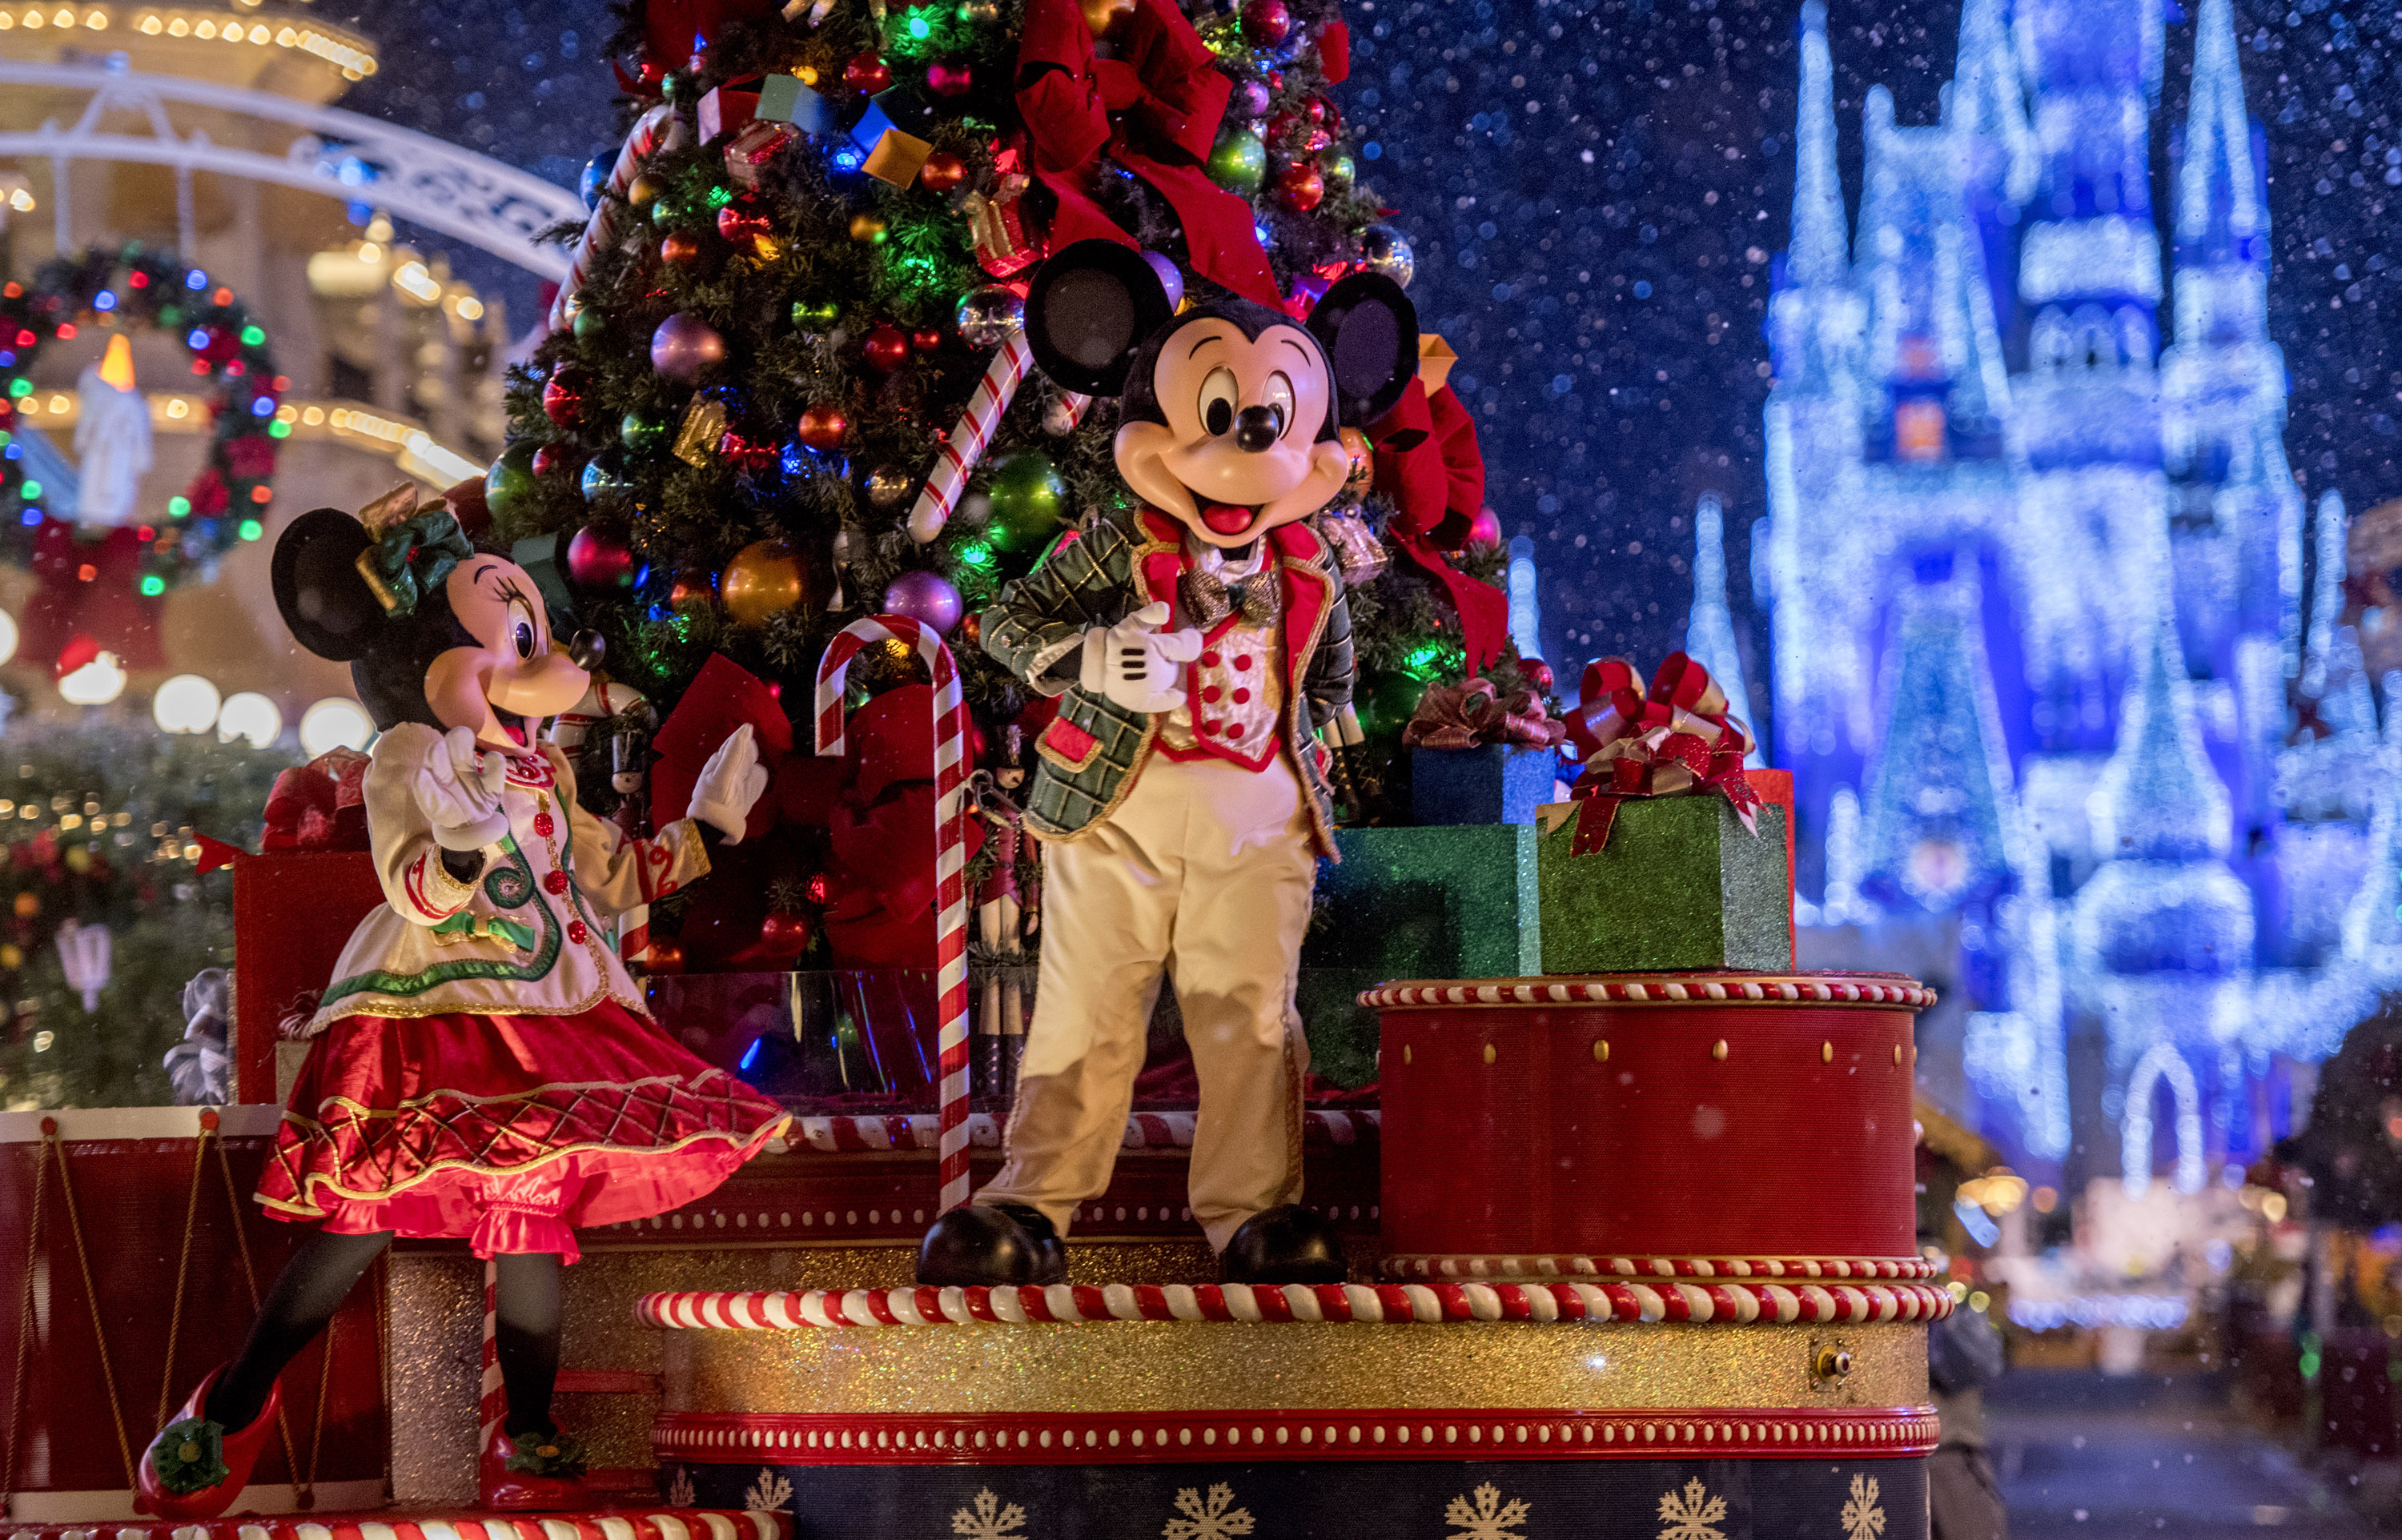 One of the best Christmas events at Disney World - Mickey's Very Merry Christmas Party! #disneyworld #xmasdisney #christmasatdisney #disneyevents #disneytrip #disneyplanning #disneyvacation